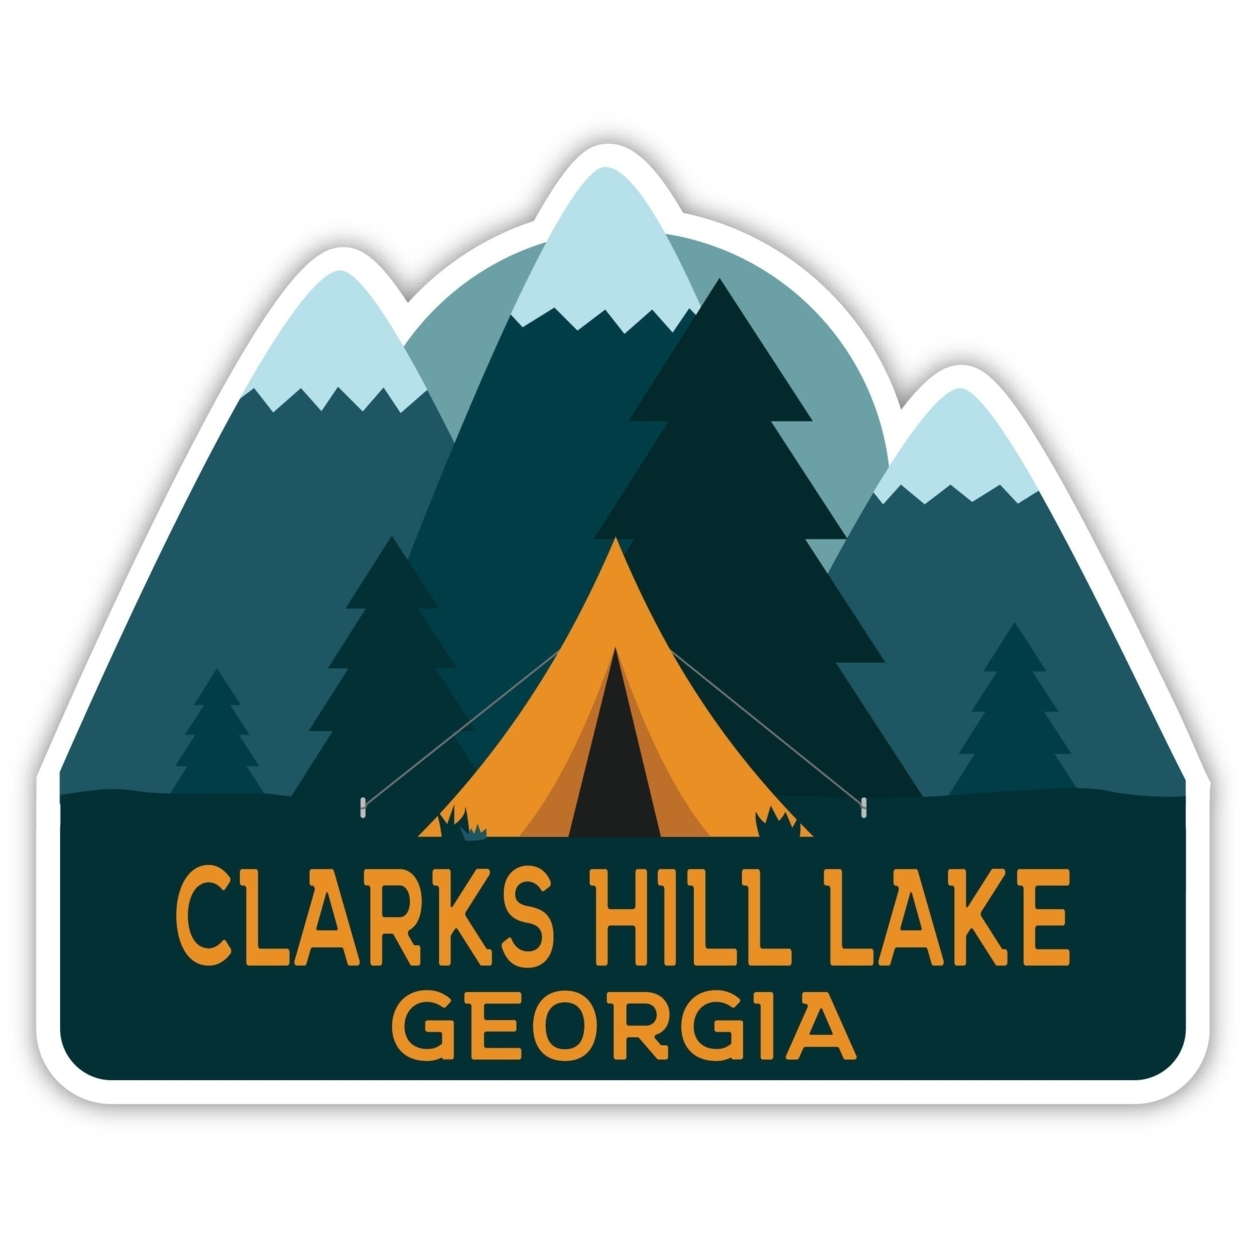 Clarks Hill Lake Georgia Souvenir Decorative Stickers (Choose Theme And Size) - 4-Pack, 2-Inch, Tent